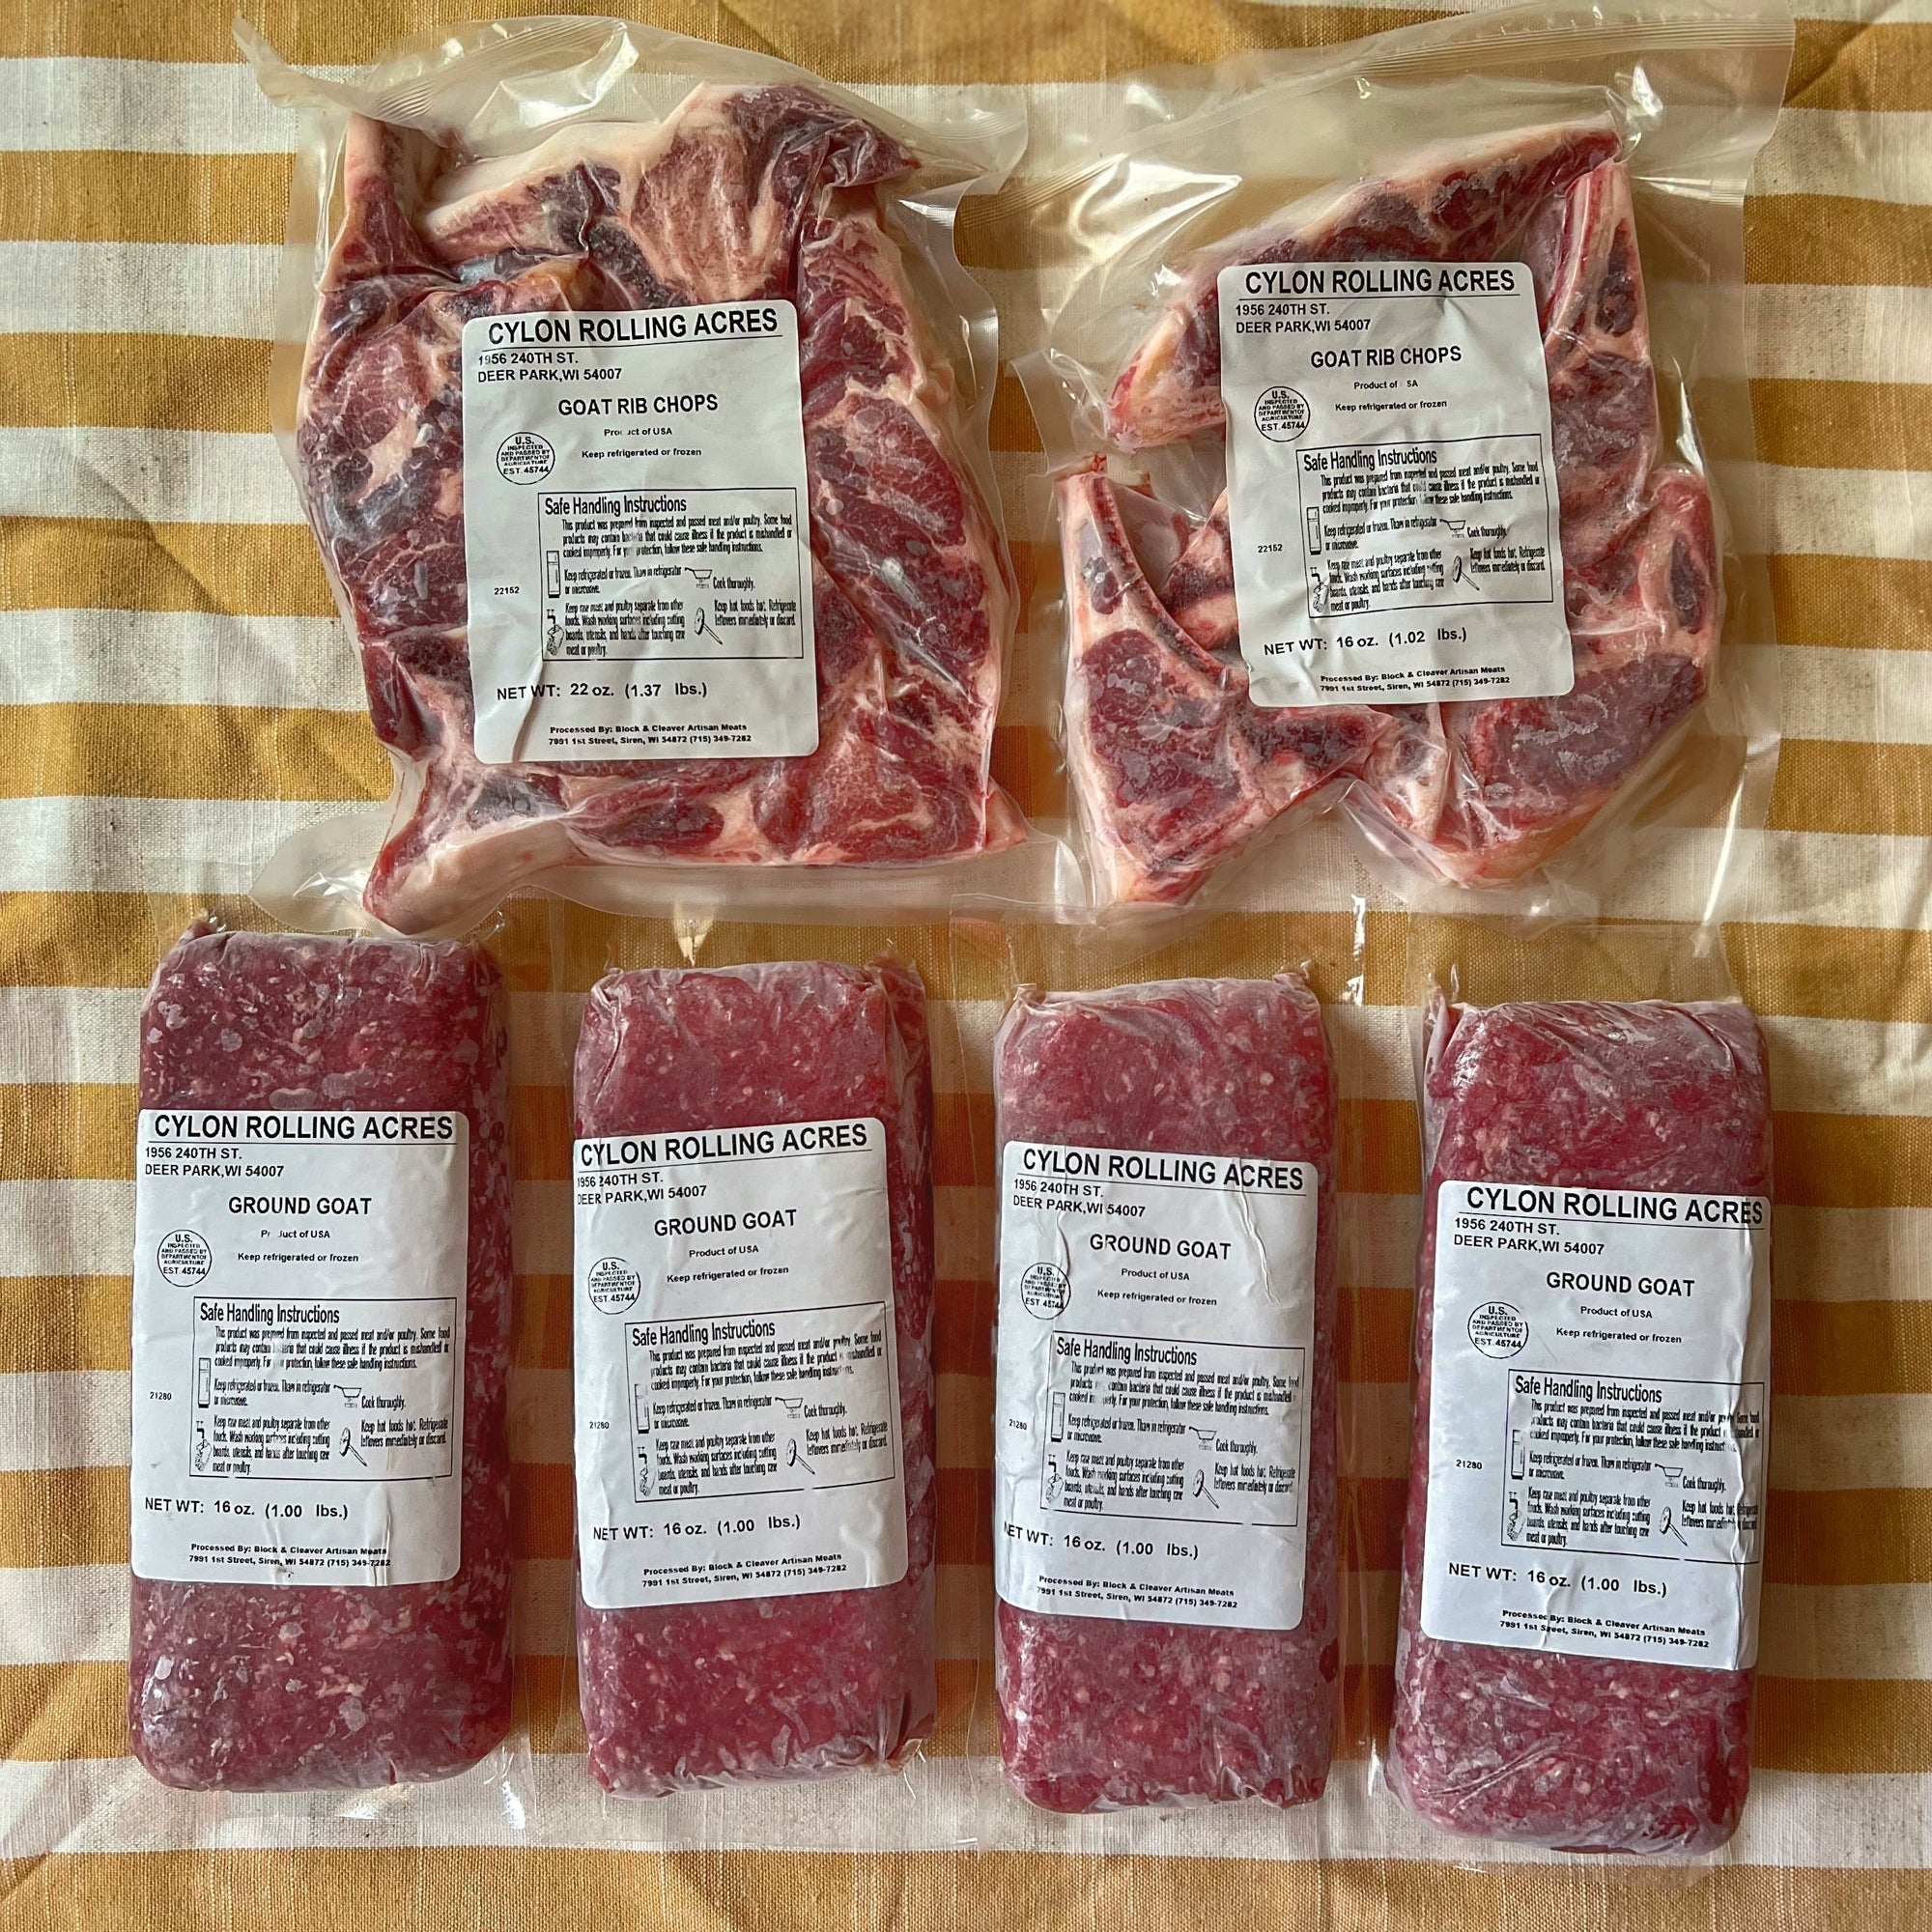 Frozen farm raised goat chops and ground goat meat.